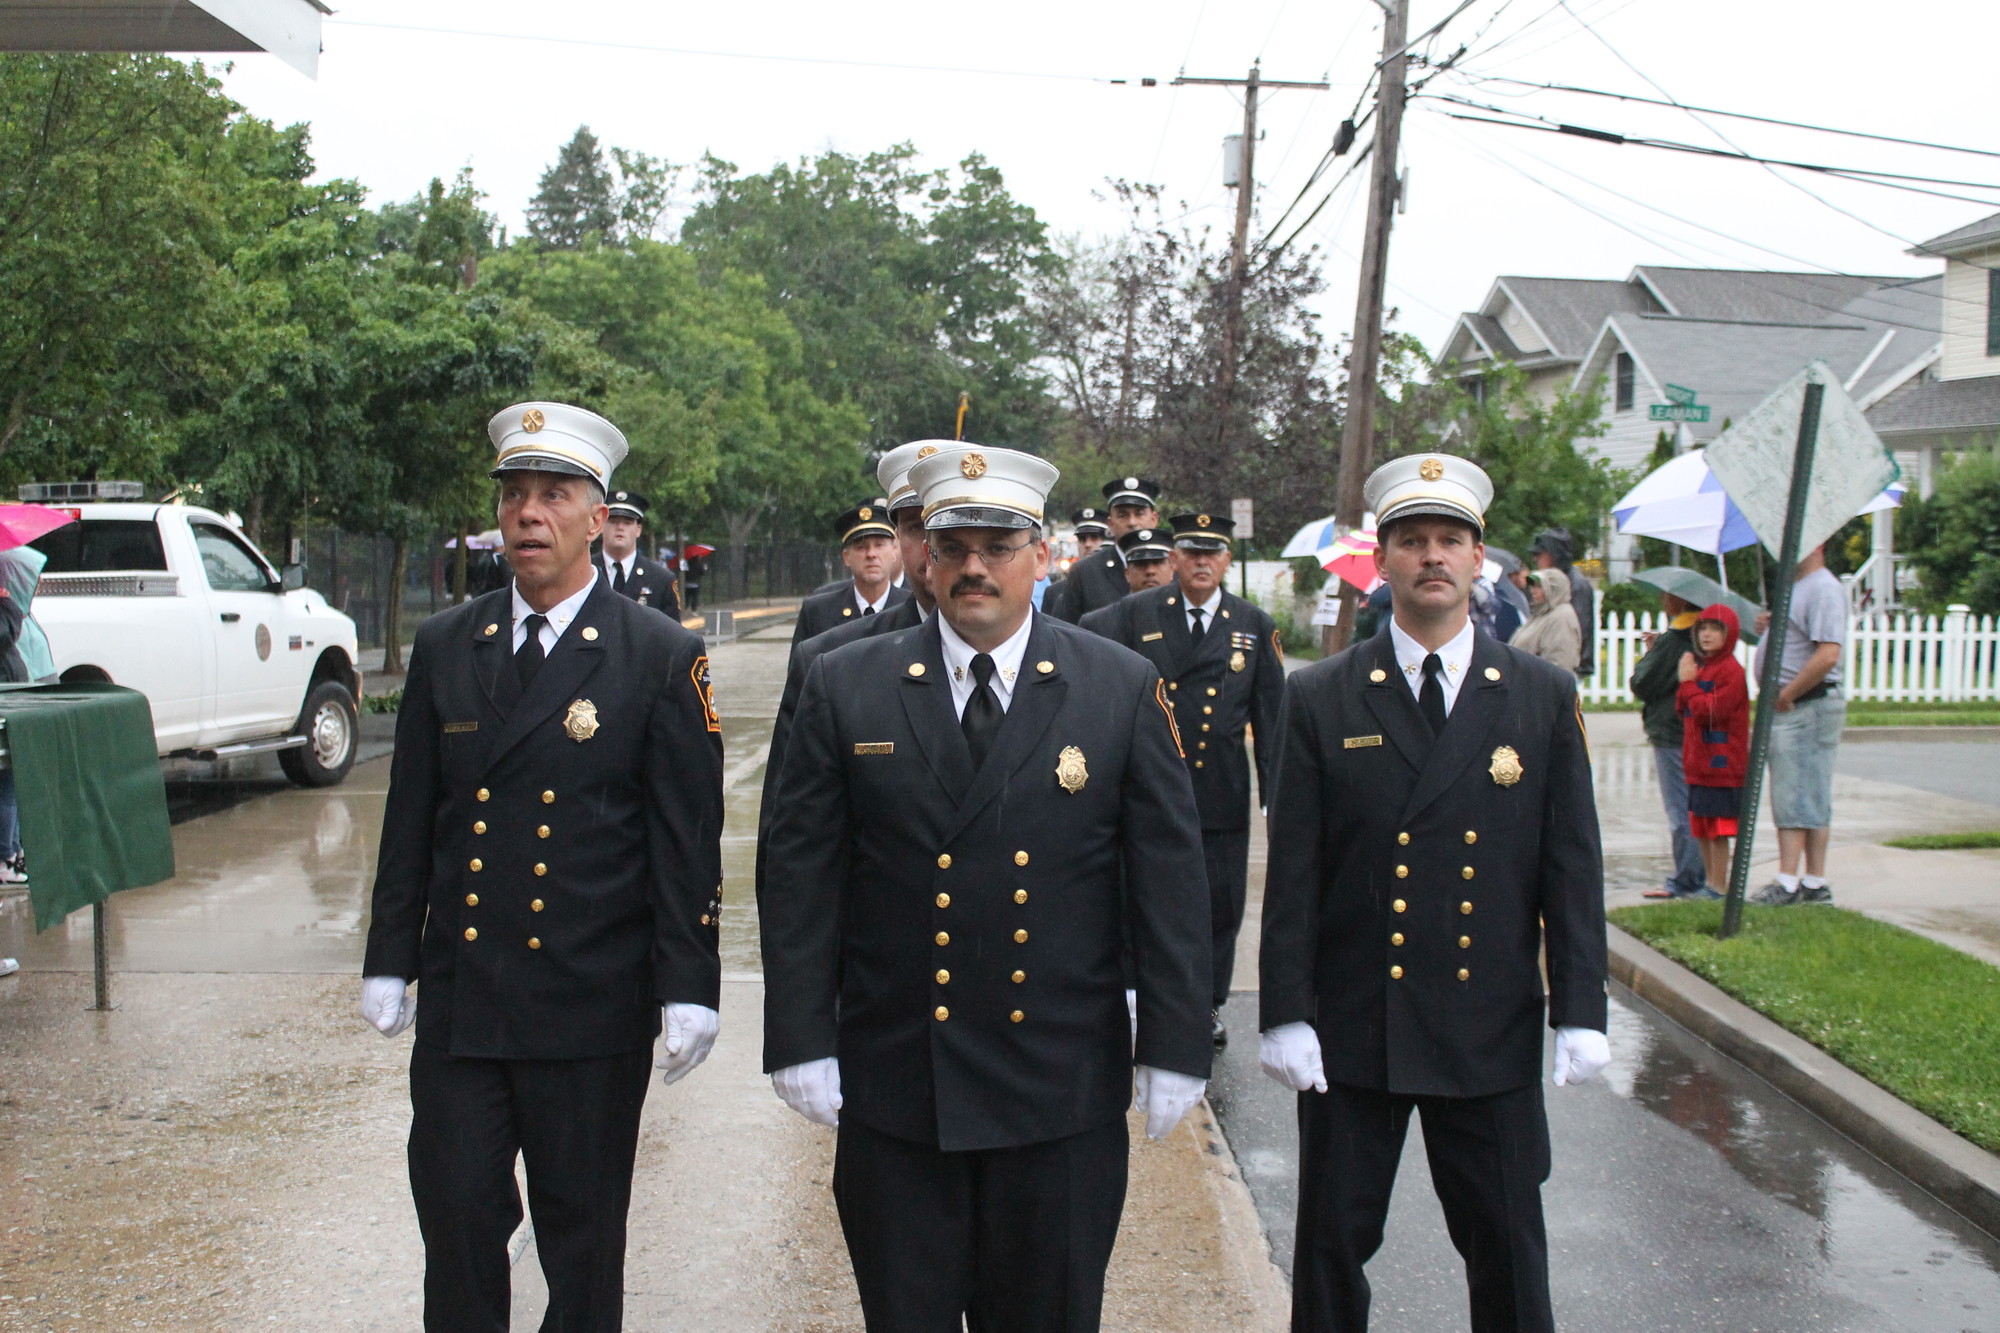 Chief Tommy Johnson, center, led his East Rockaway Fire Department members in the parade — under rainy skies.